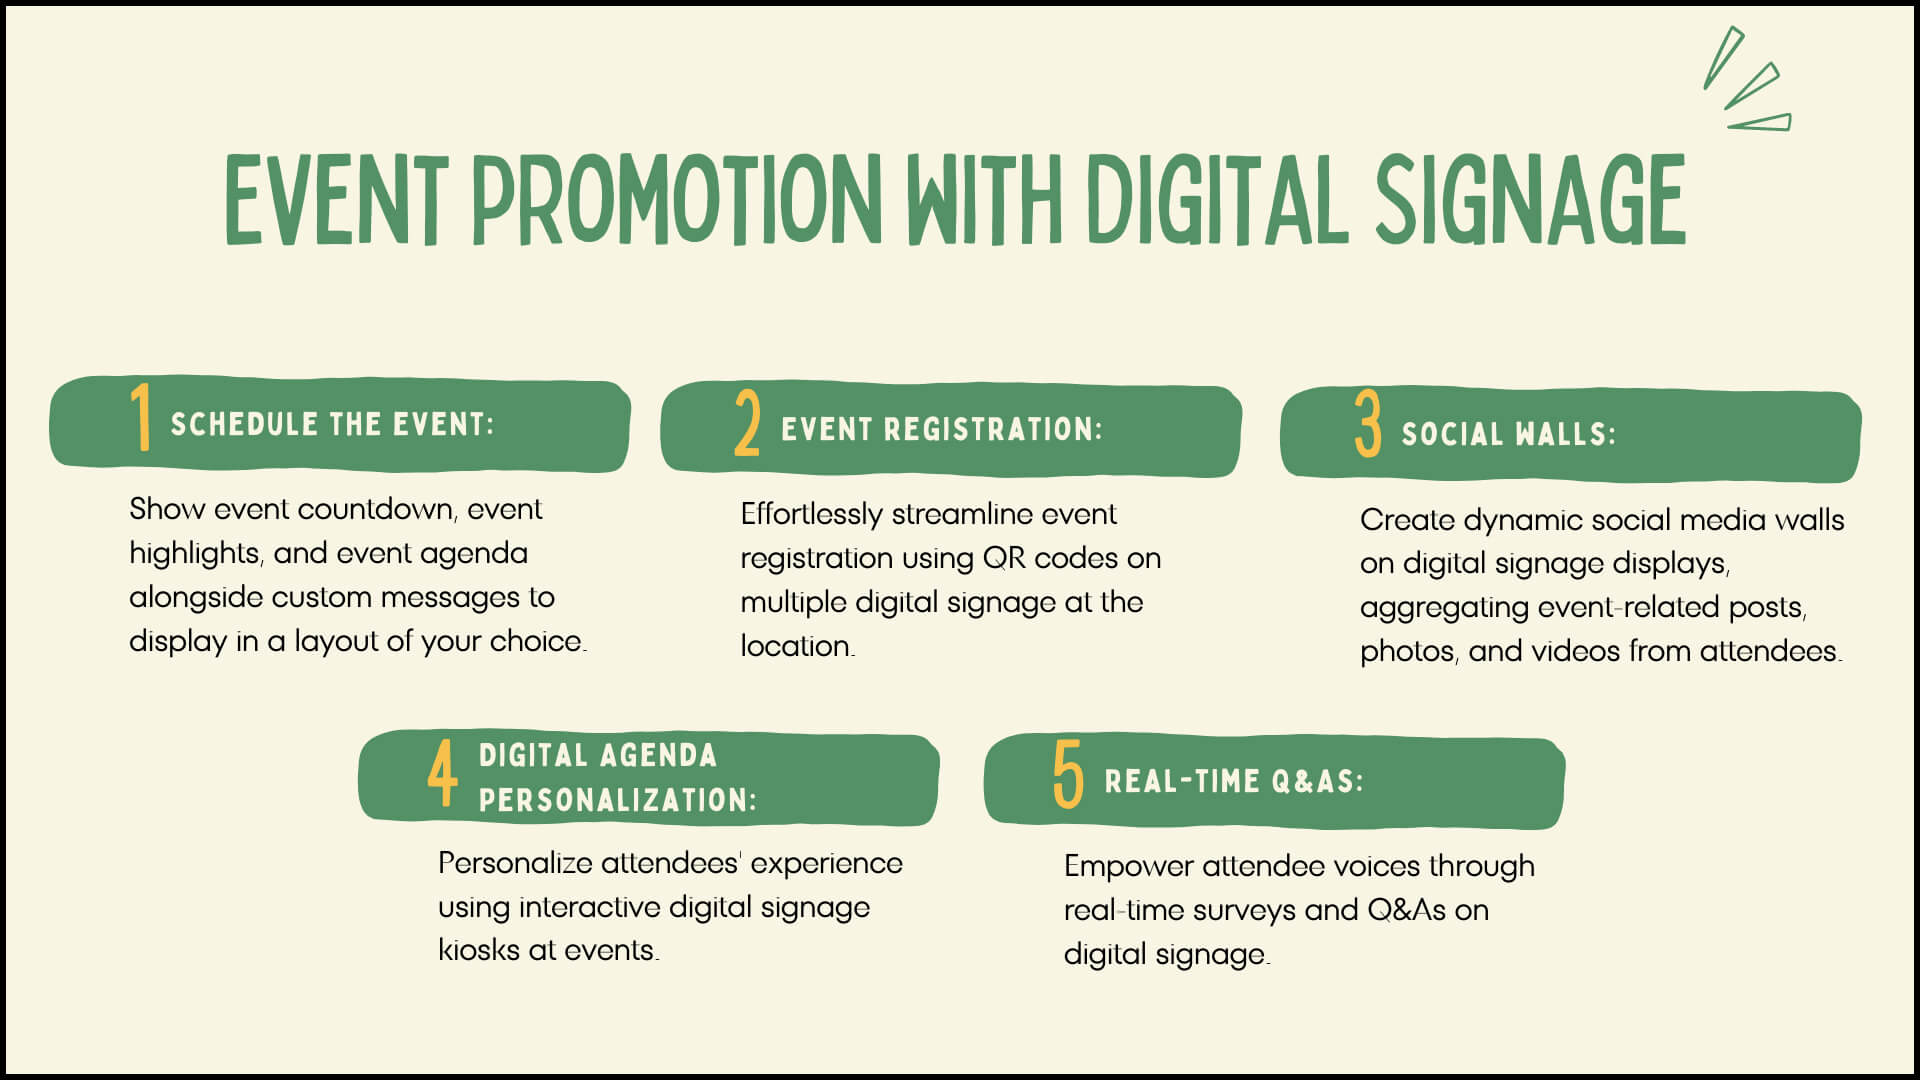 5 ways to promote events with digital signage